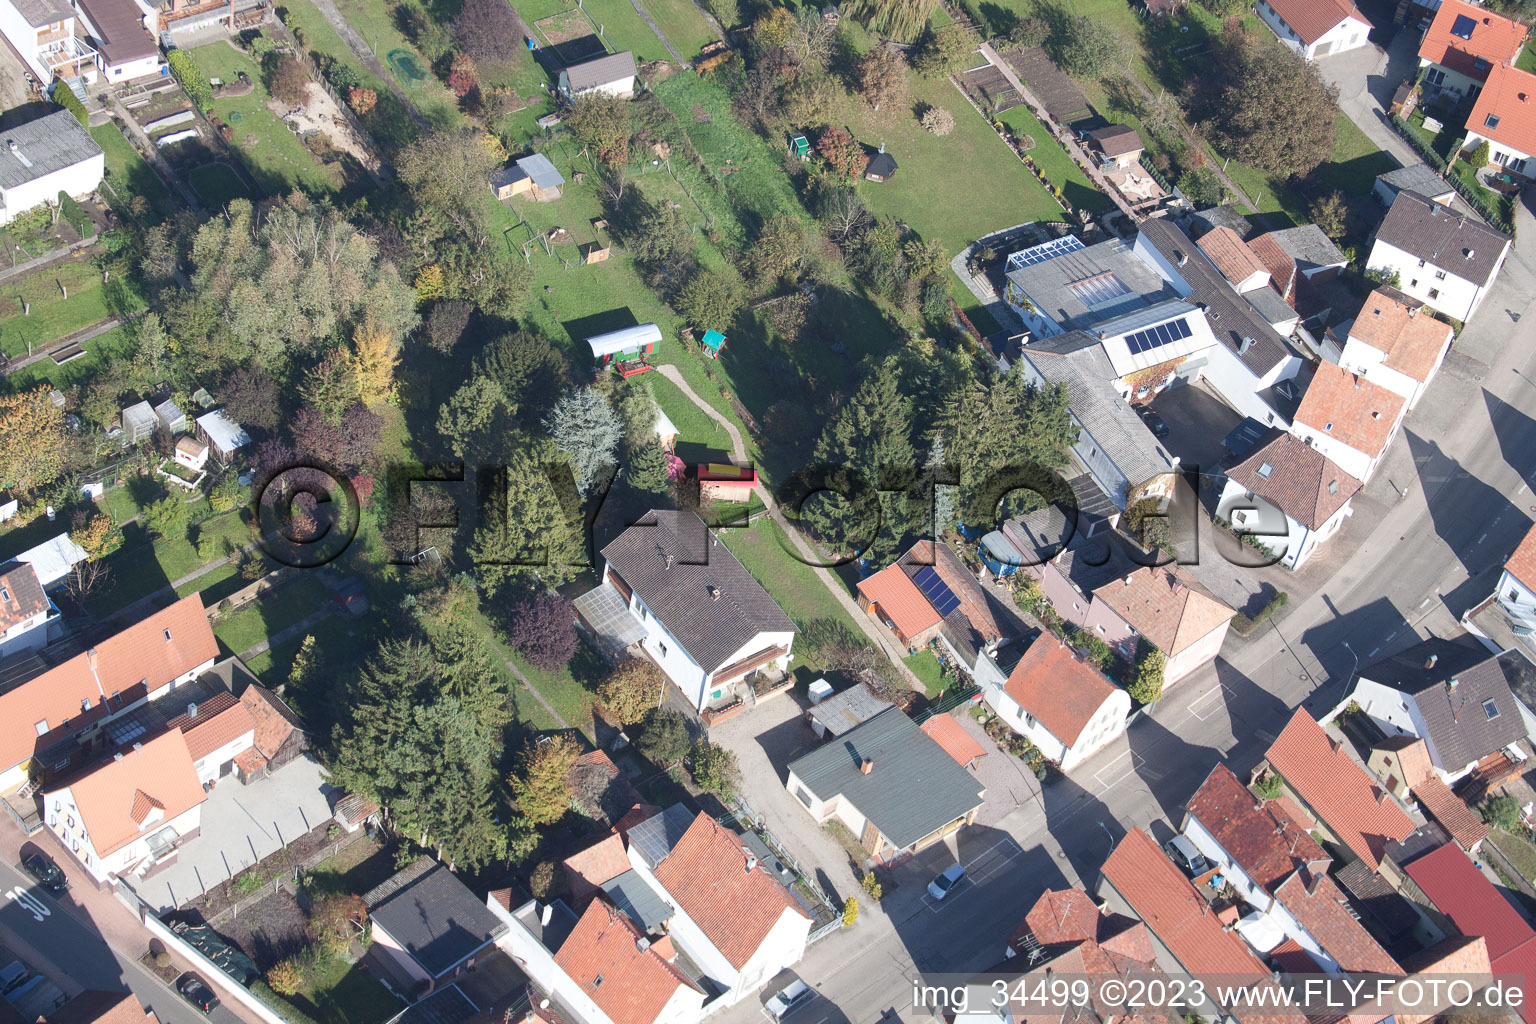 Saarstrasse Villa Kunterbunt in Kandel in the state Rhineland-Palatinate, Germany from above